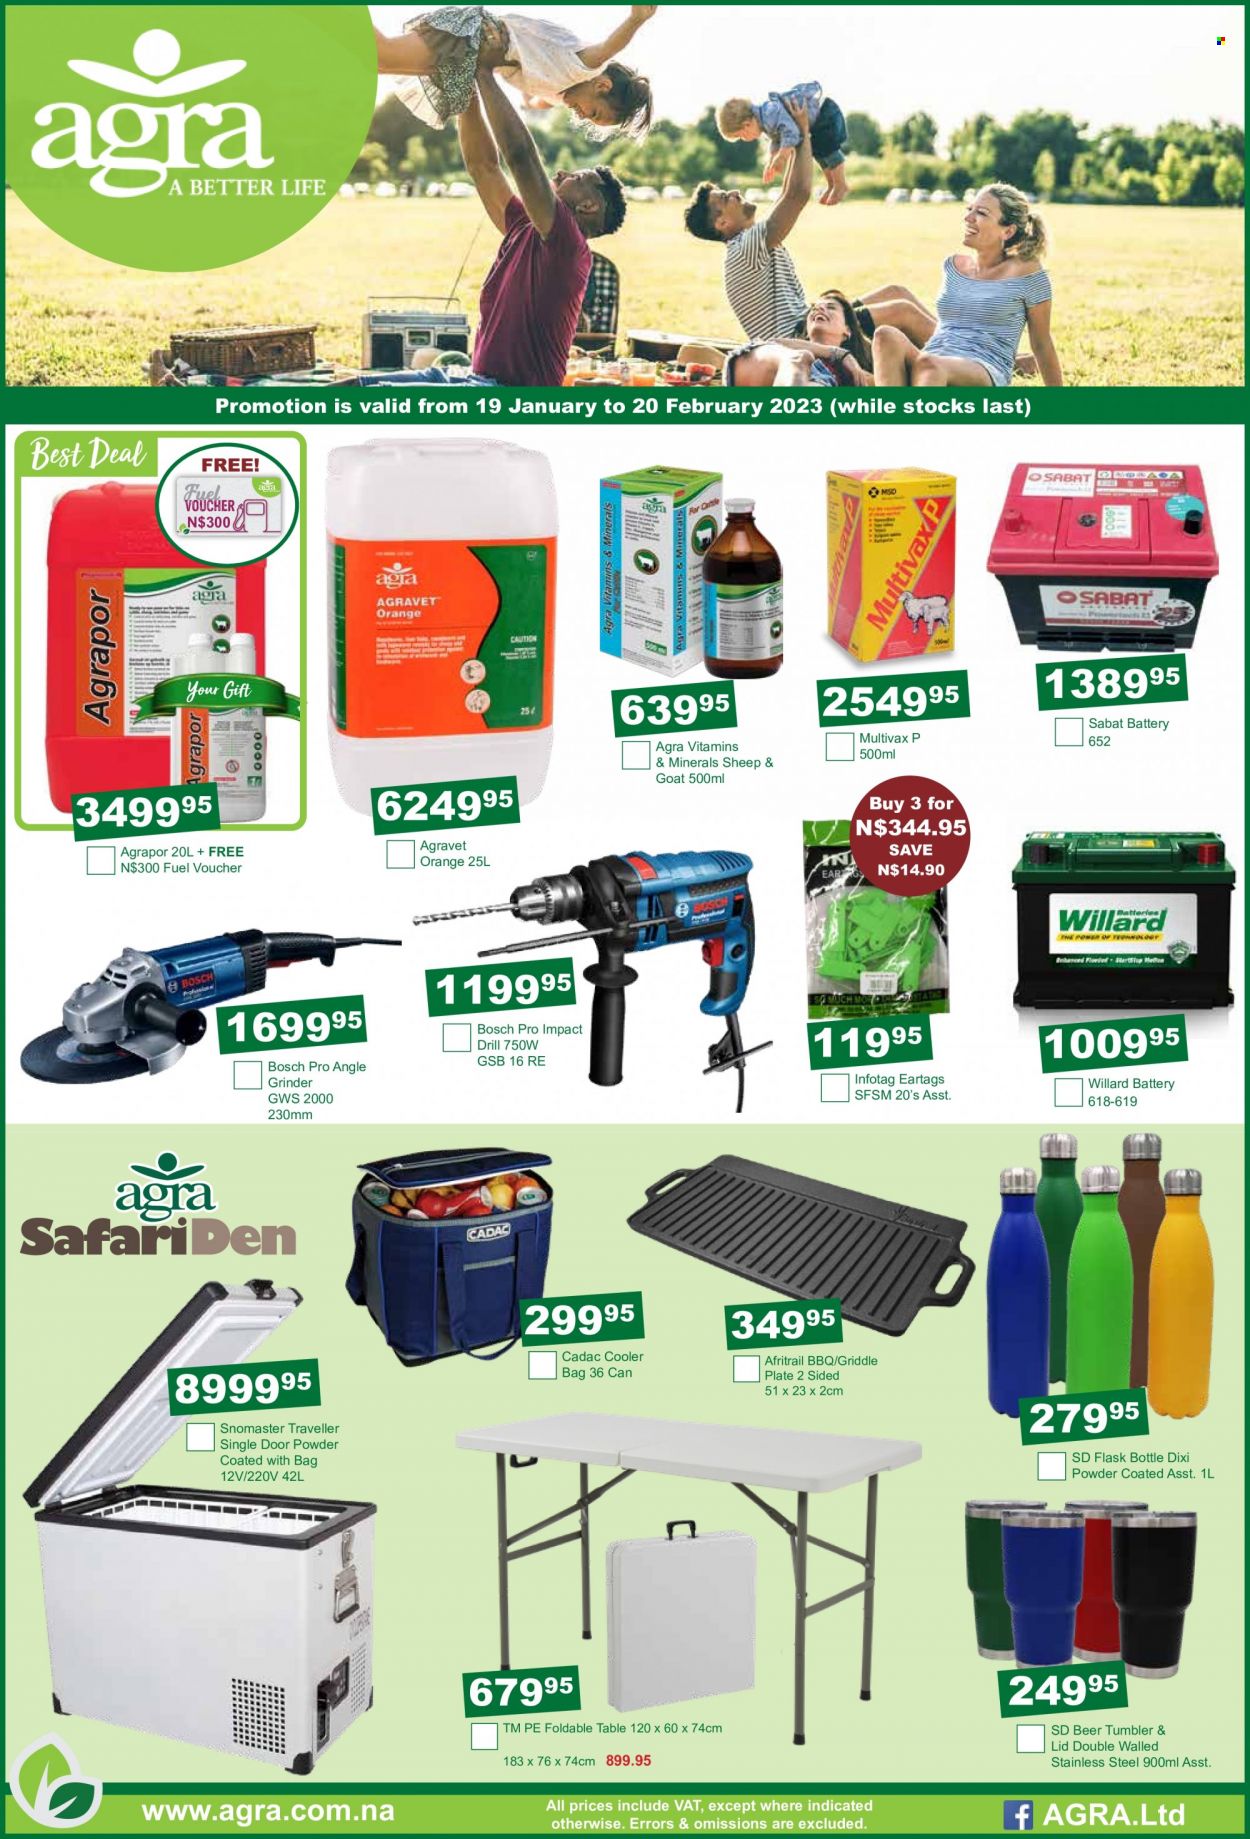 thumbnail - Agra catalogue  - 19/01/2023 - 20/02/2023 - Sales products - bag, battery, Bosch, door, drill, grinder, angle grinder, table. Page 1.